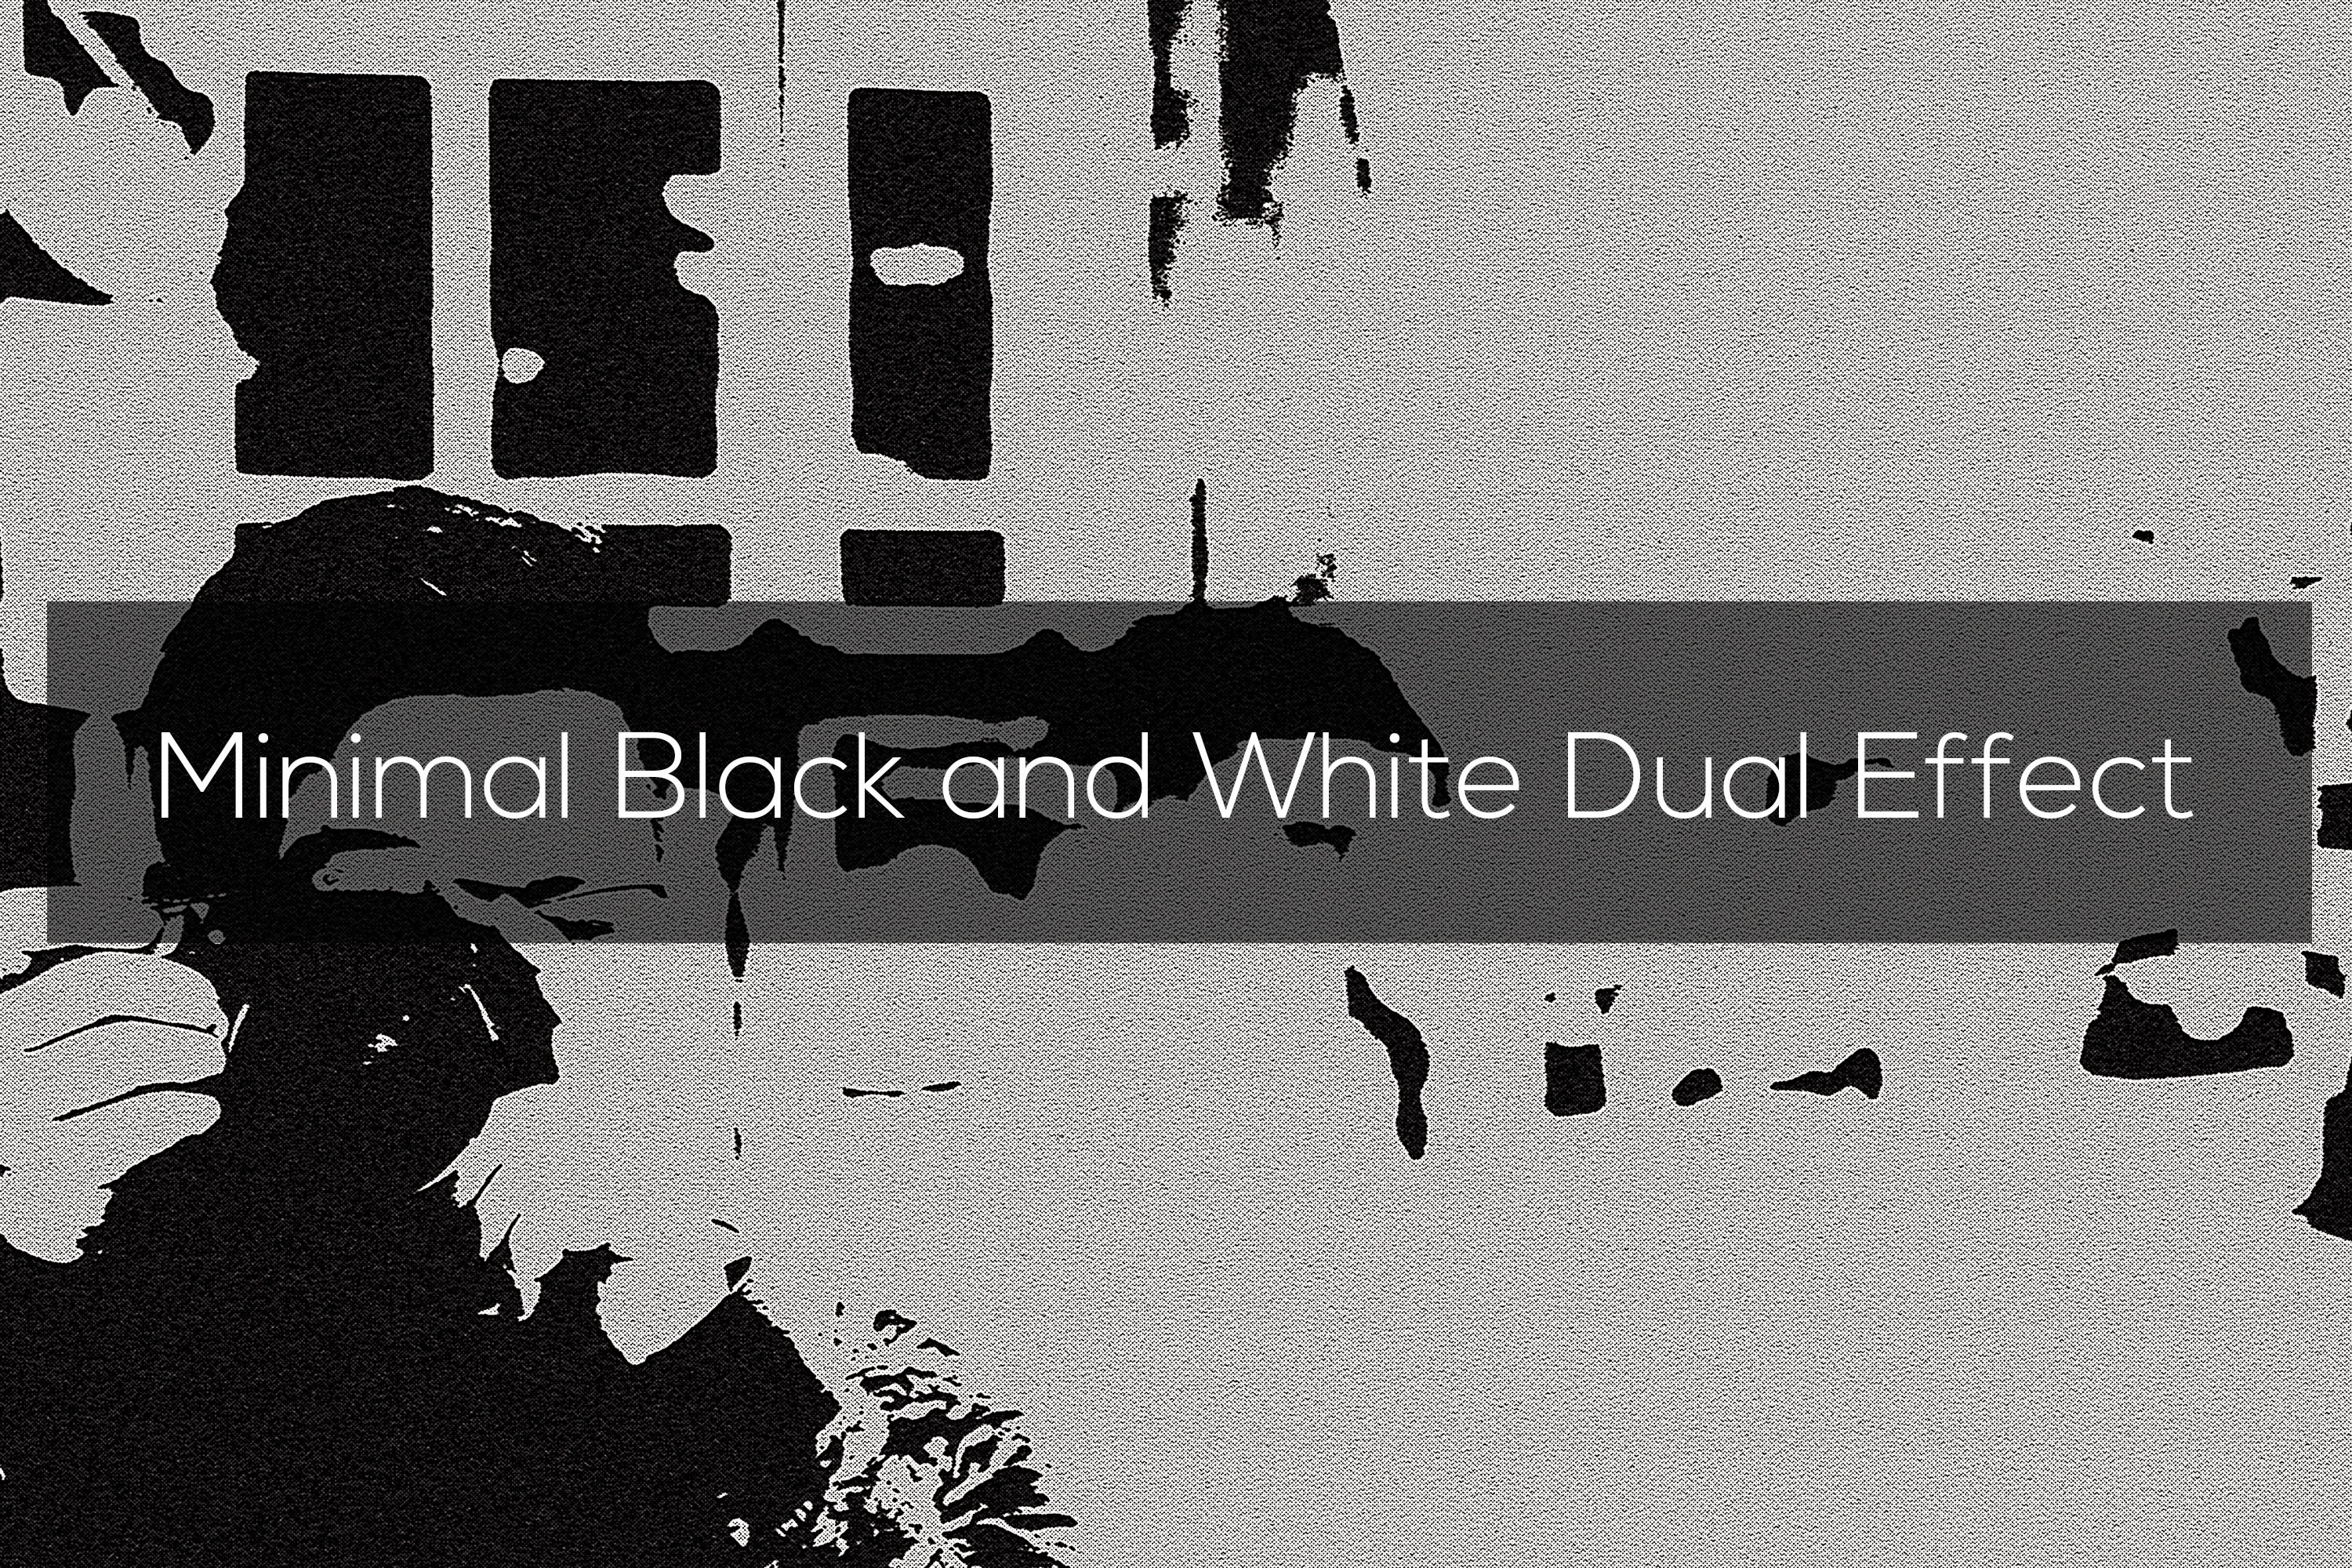 Minimal Black and White Dual Effectcover image.